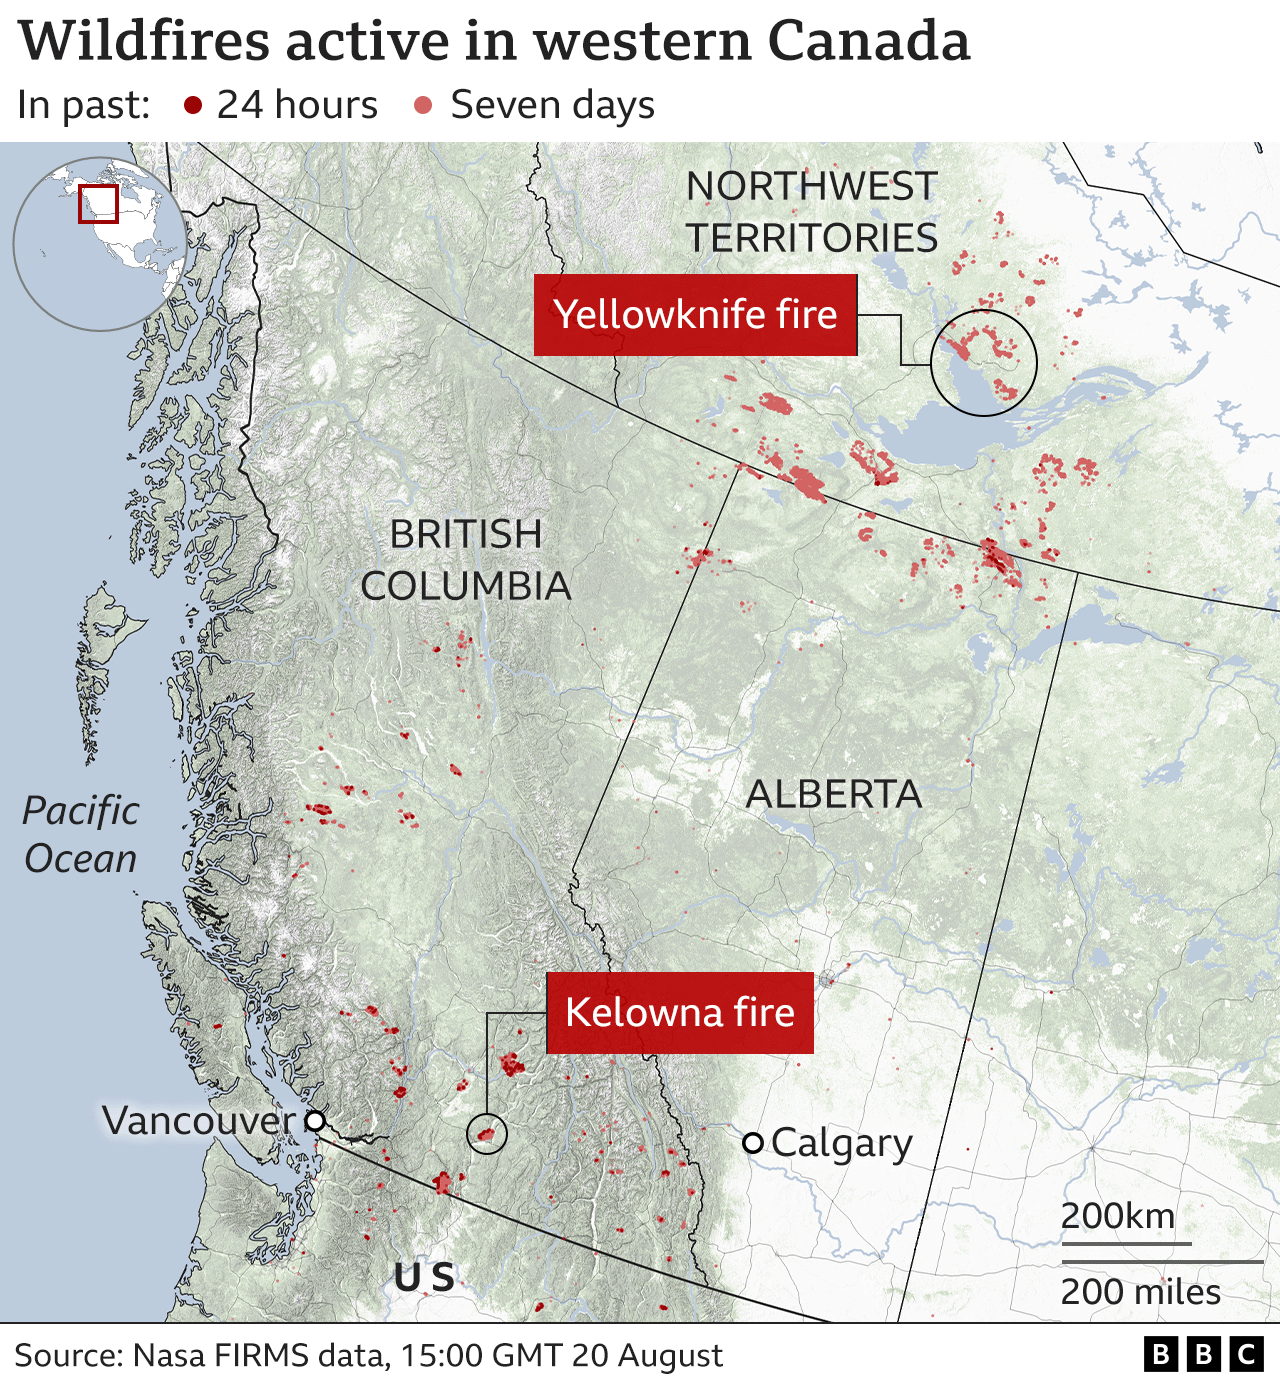 A BBC graphic (current as of 15:00 GMT on 20 August) shows wildfires across the Canadian provinces of British Columbia, Northwest Territories and Alberta. A large number of fires are in the Northwest Territories - including around the city of Yellowknife. Others are clustered around Kelowna in British Columbia